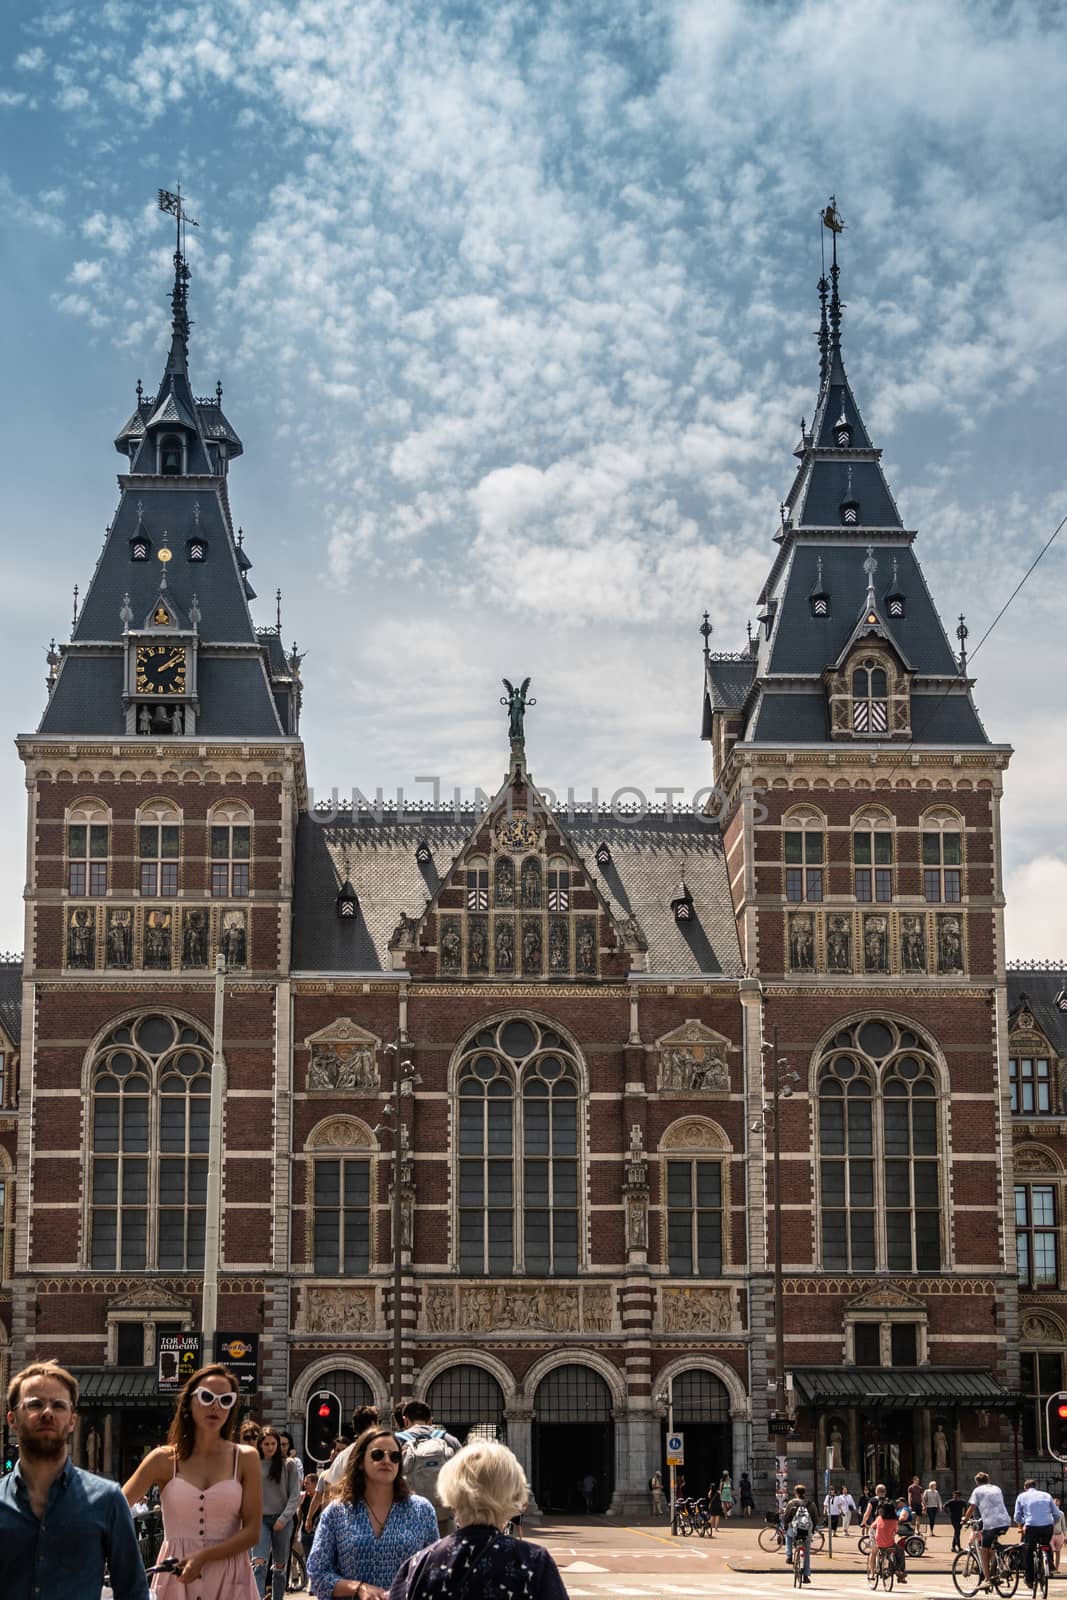 Amsterdam, the Netherlands - June 30, 2019: Monumental entrance facade with towers in beige and red bricks. Statues and frescoes. Under blue-whtie cloudscape. People in front.